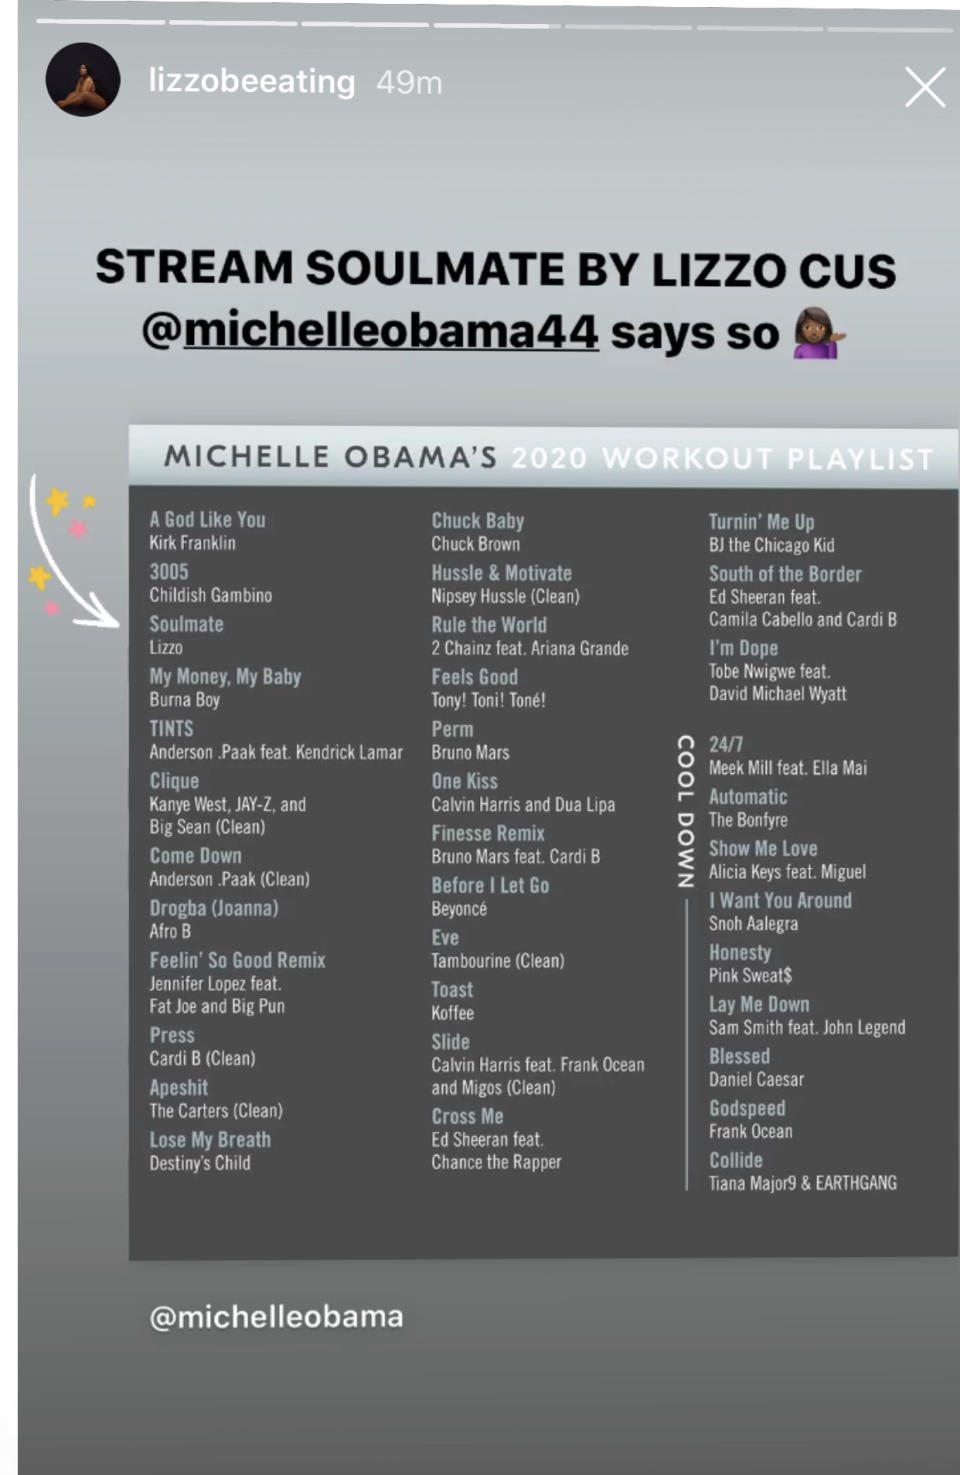 Lizzo shares her excitement over appearing on Michelle Obama's workout playlist. (Instagram/Lizzo)